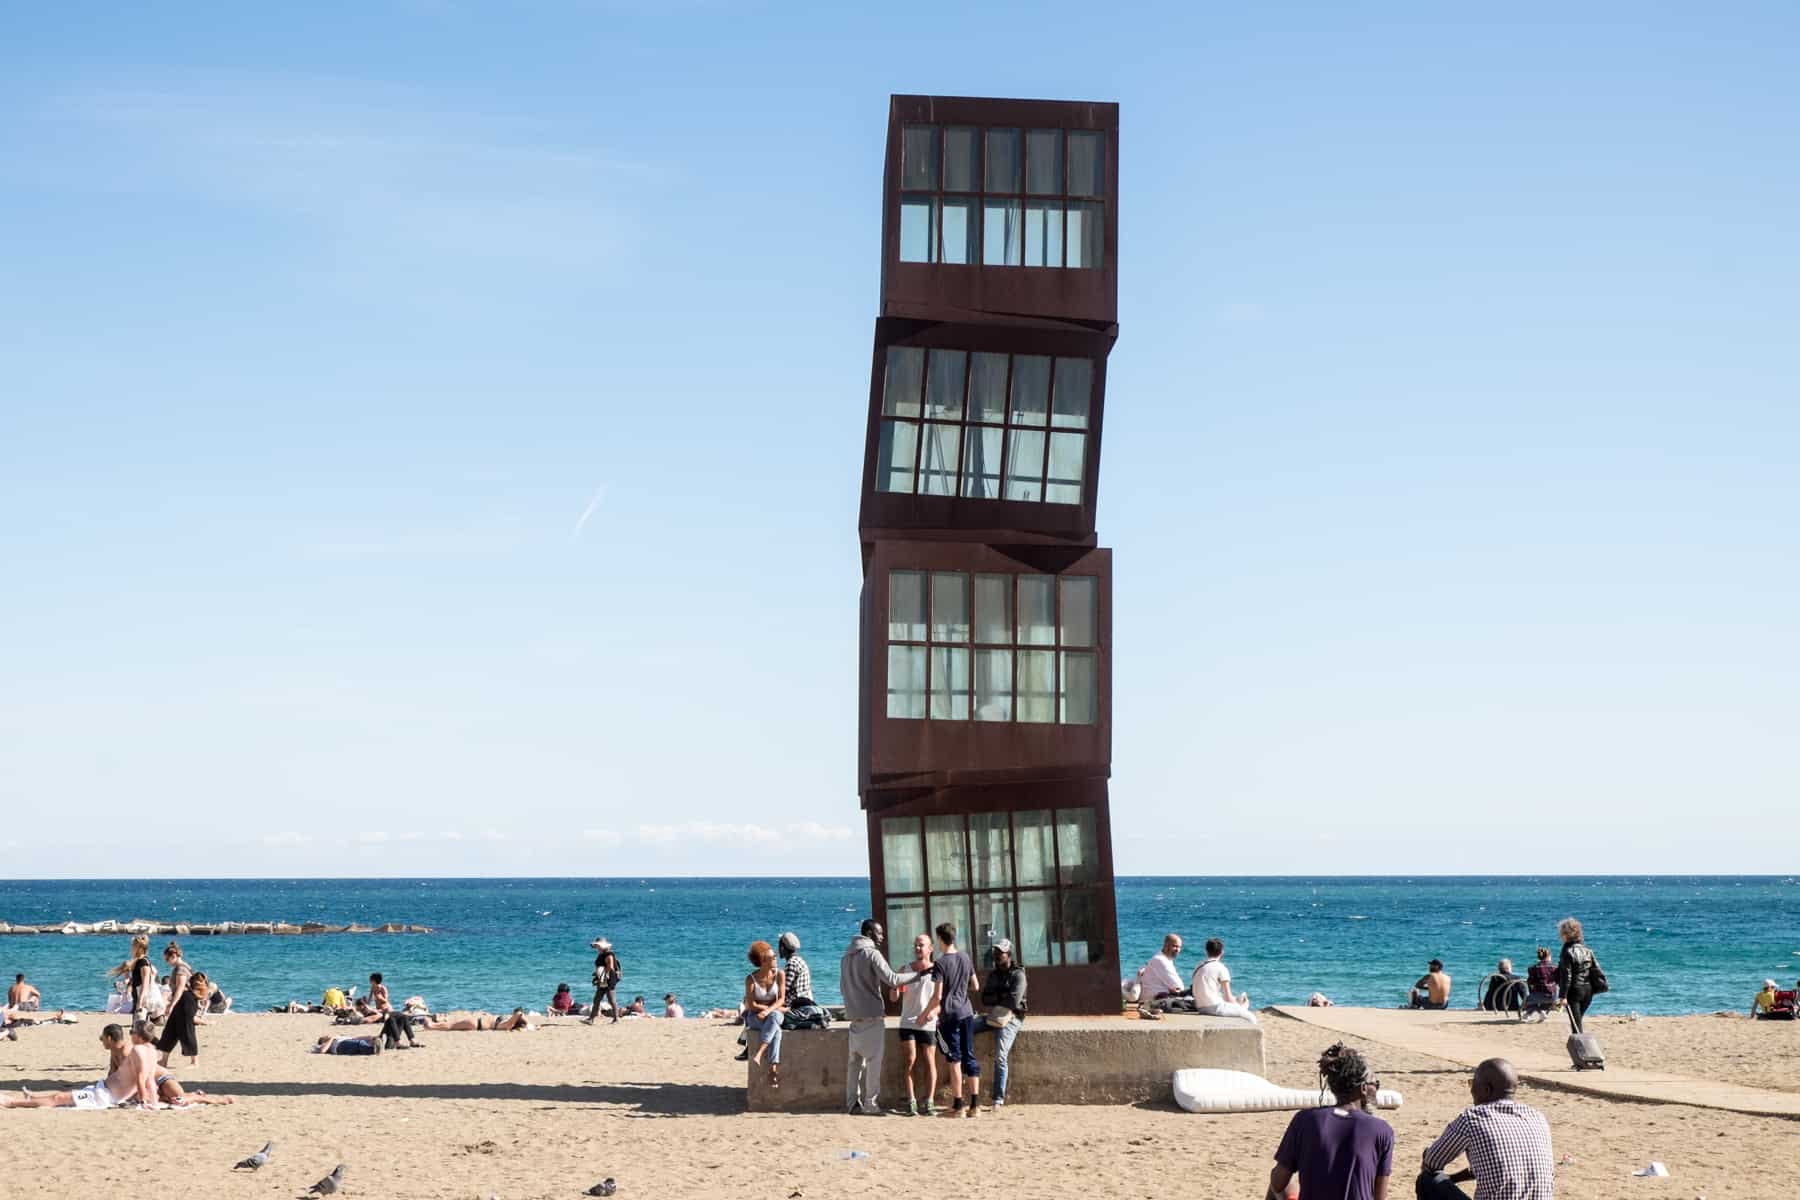 An artwork made of four, stacked brown squares with glass windows on the golden sand beach in Barcelona. The sea is a bright blue against a clear and sunny sky. 